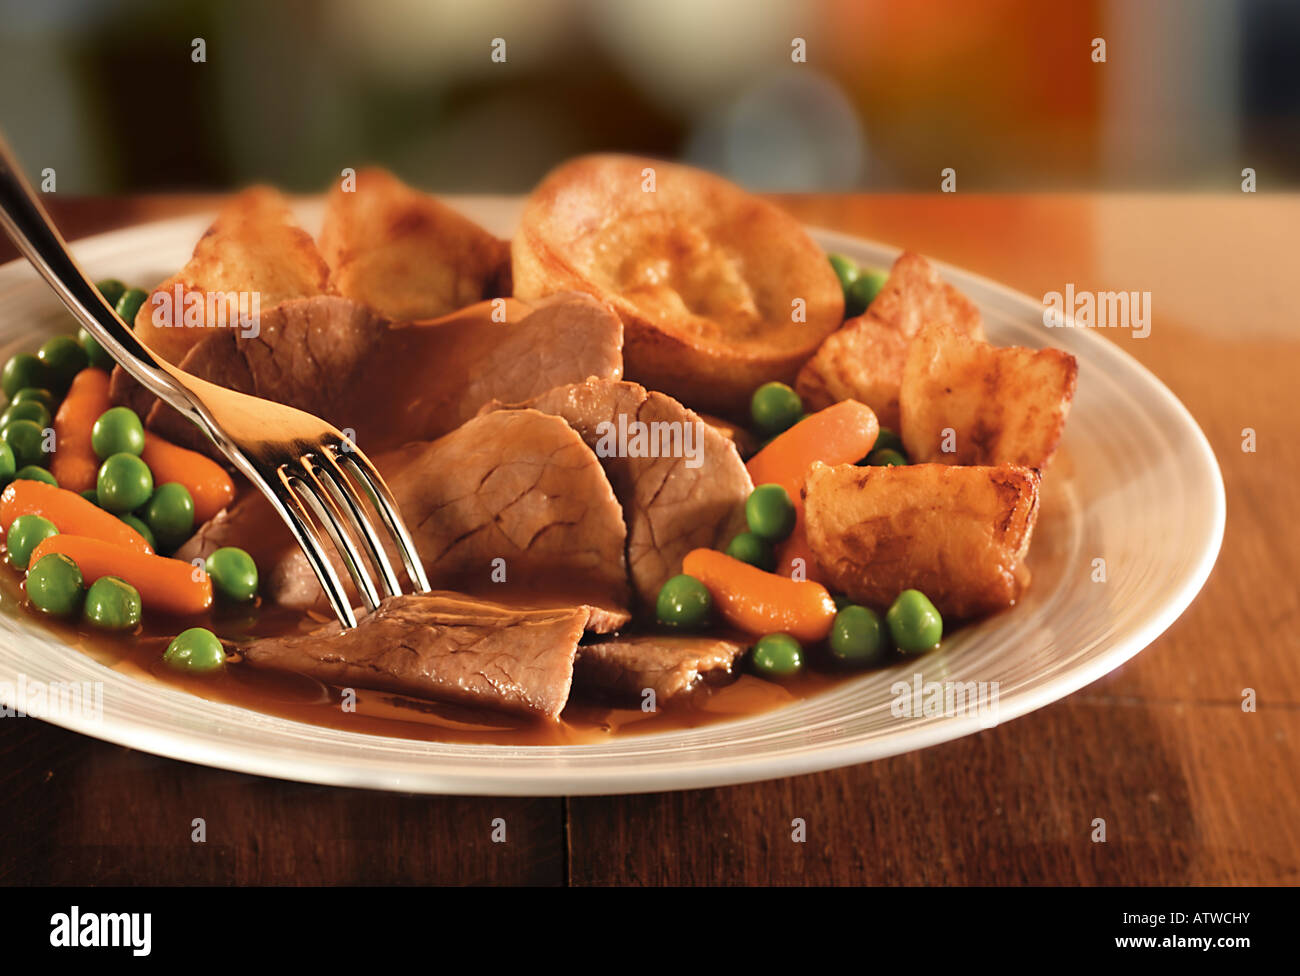 Traditional roast beef dinner with roast potatoes and yorkshire pudding Stock Photo